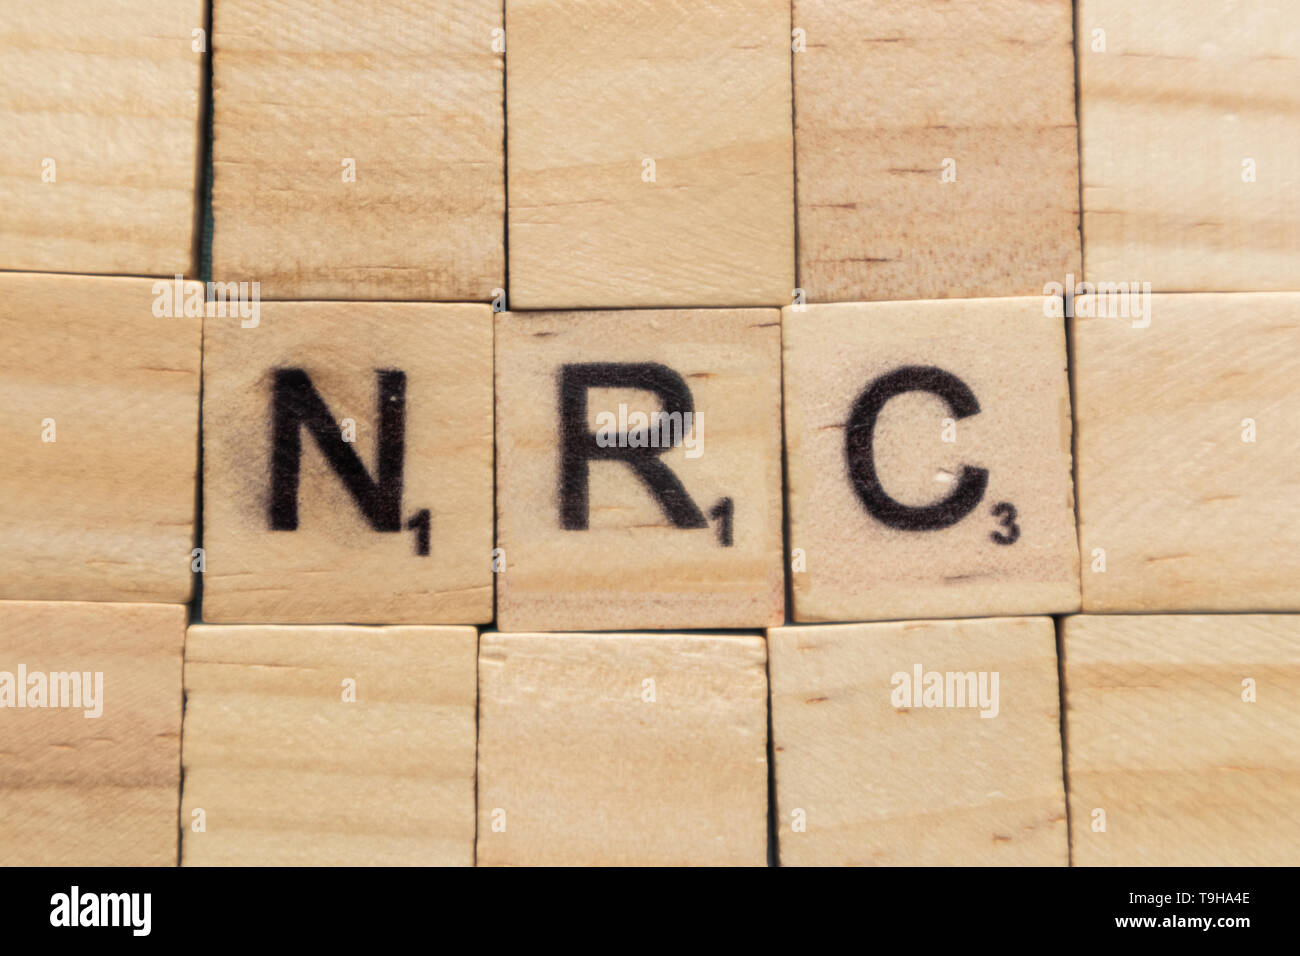 Maski, India- 18, May 2019: NRC or National Register of Citizens in wooden block letters. Stock Photo